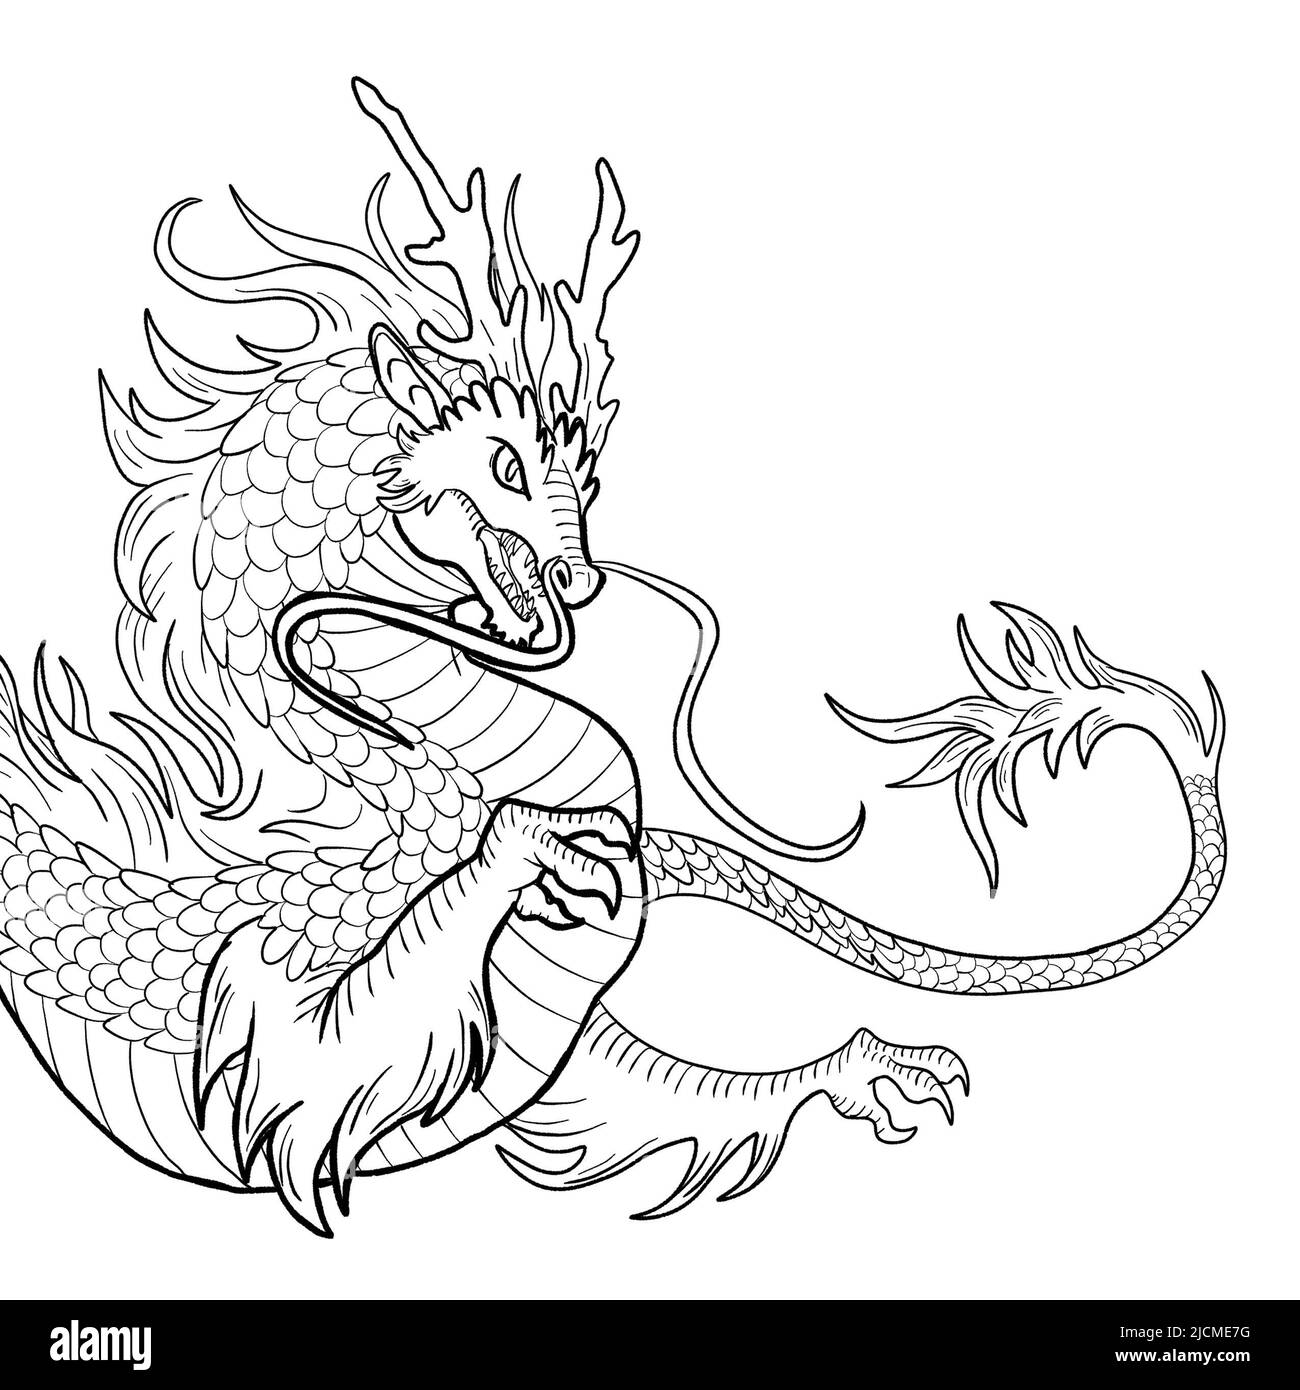 Black and white coloring page ink illustration of a dragon Stock Photo ...